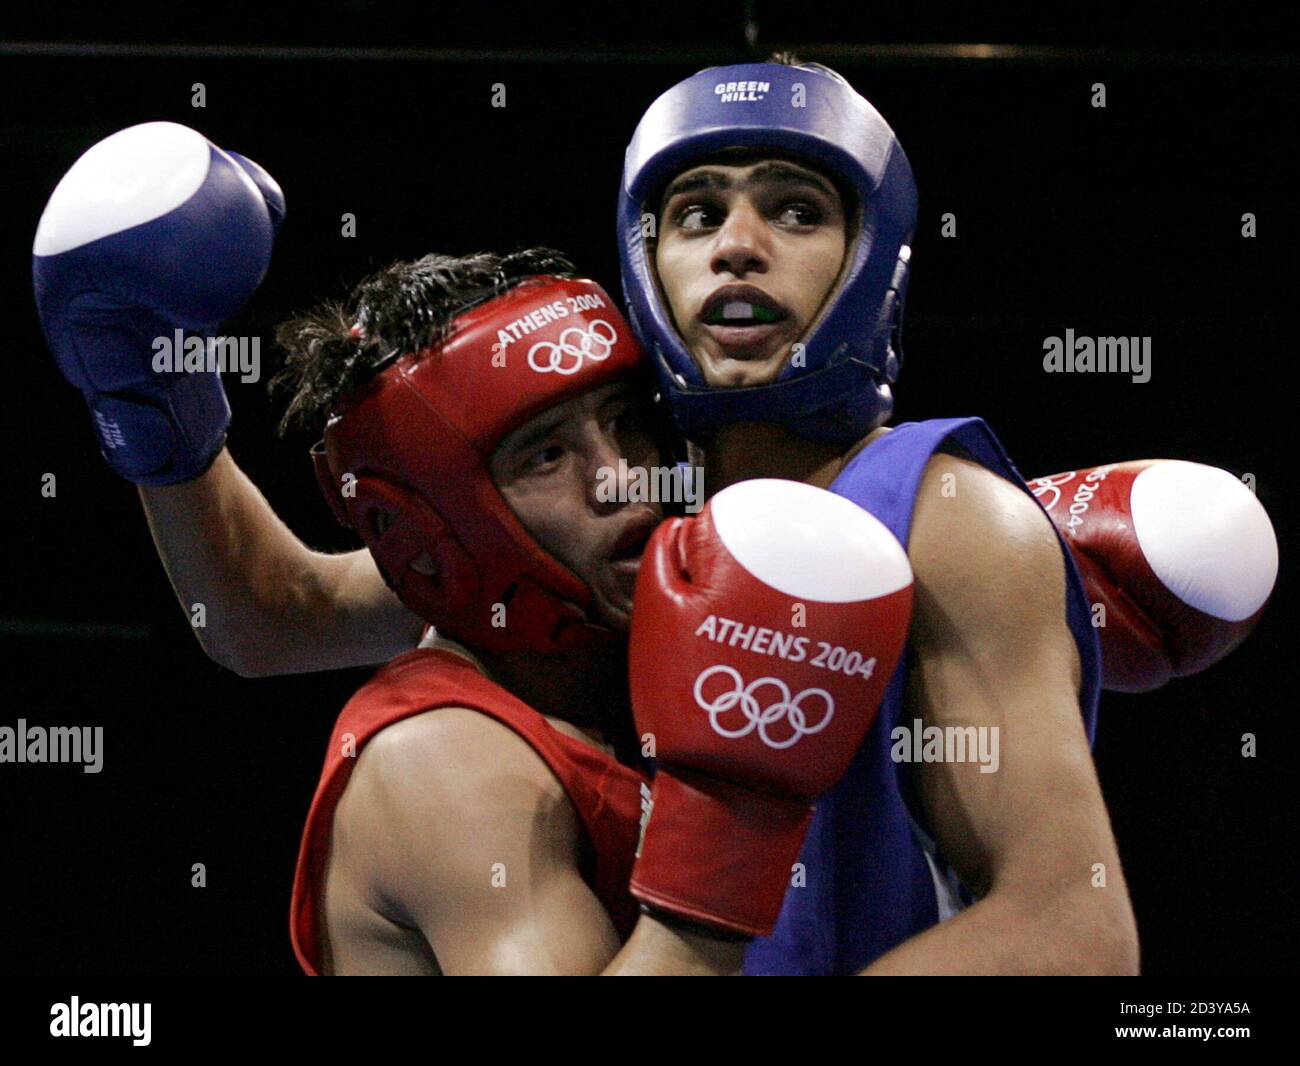 Britain's Amir Khan (R) fights against Kazakhstan's Serik Yeleuov during the men's lightweight (60 kg) semi-final boxing match at the Athens 2004 Olympic Summer Games, August 27, 2004. Khan won the match. Stock Photo